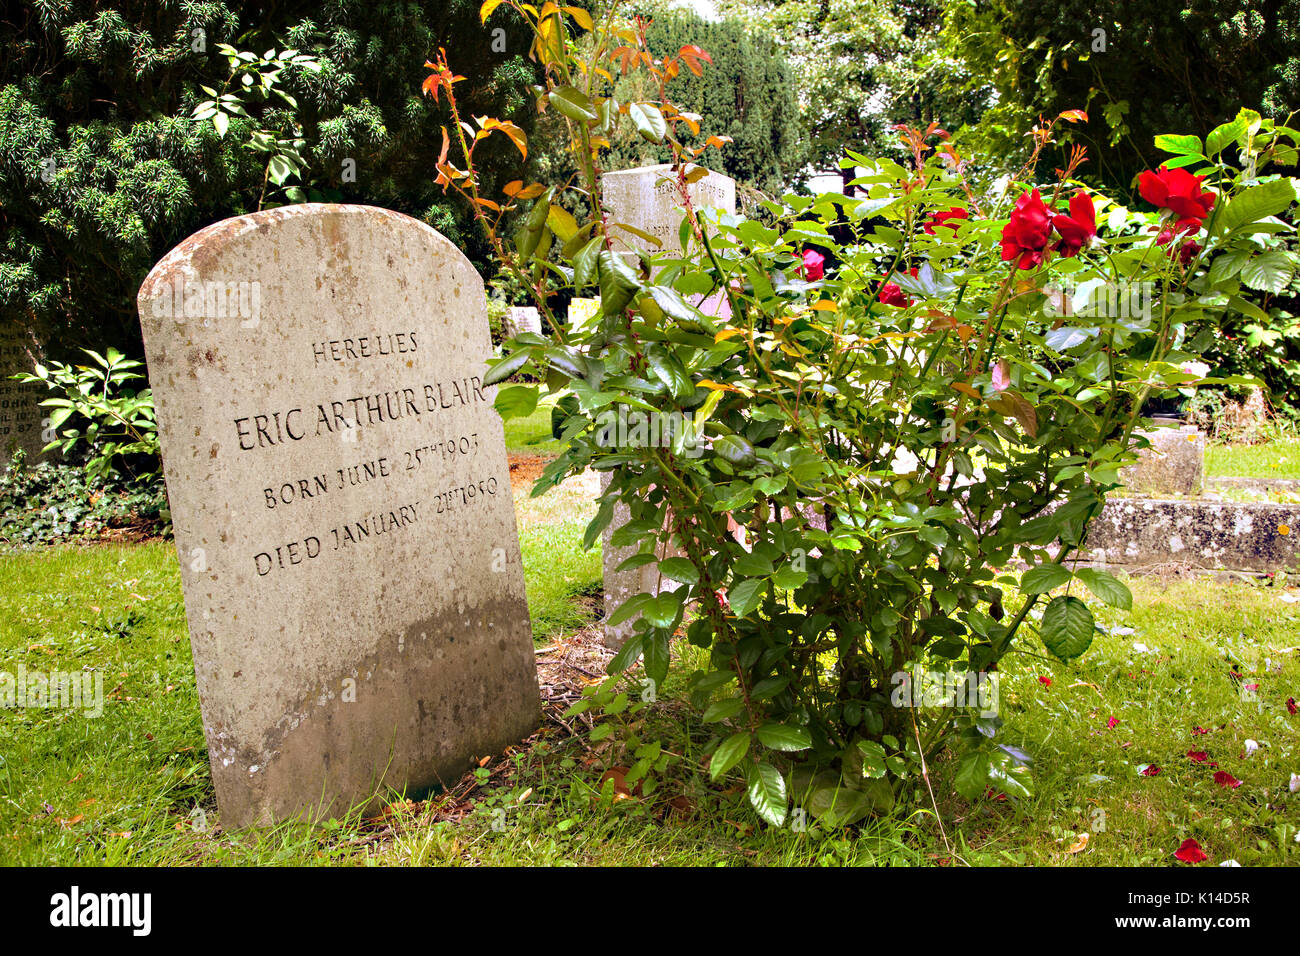 The grave of Eric Arthur Blair, better known as the author George Orwell, in the churchyard at All Saints church Sutton Courtenay Oxfordshire England Stock Photo